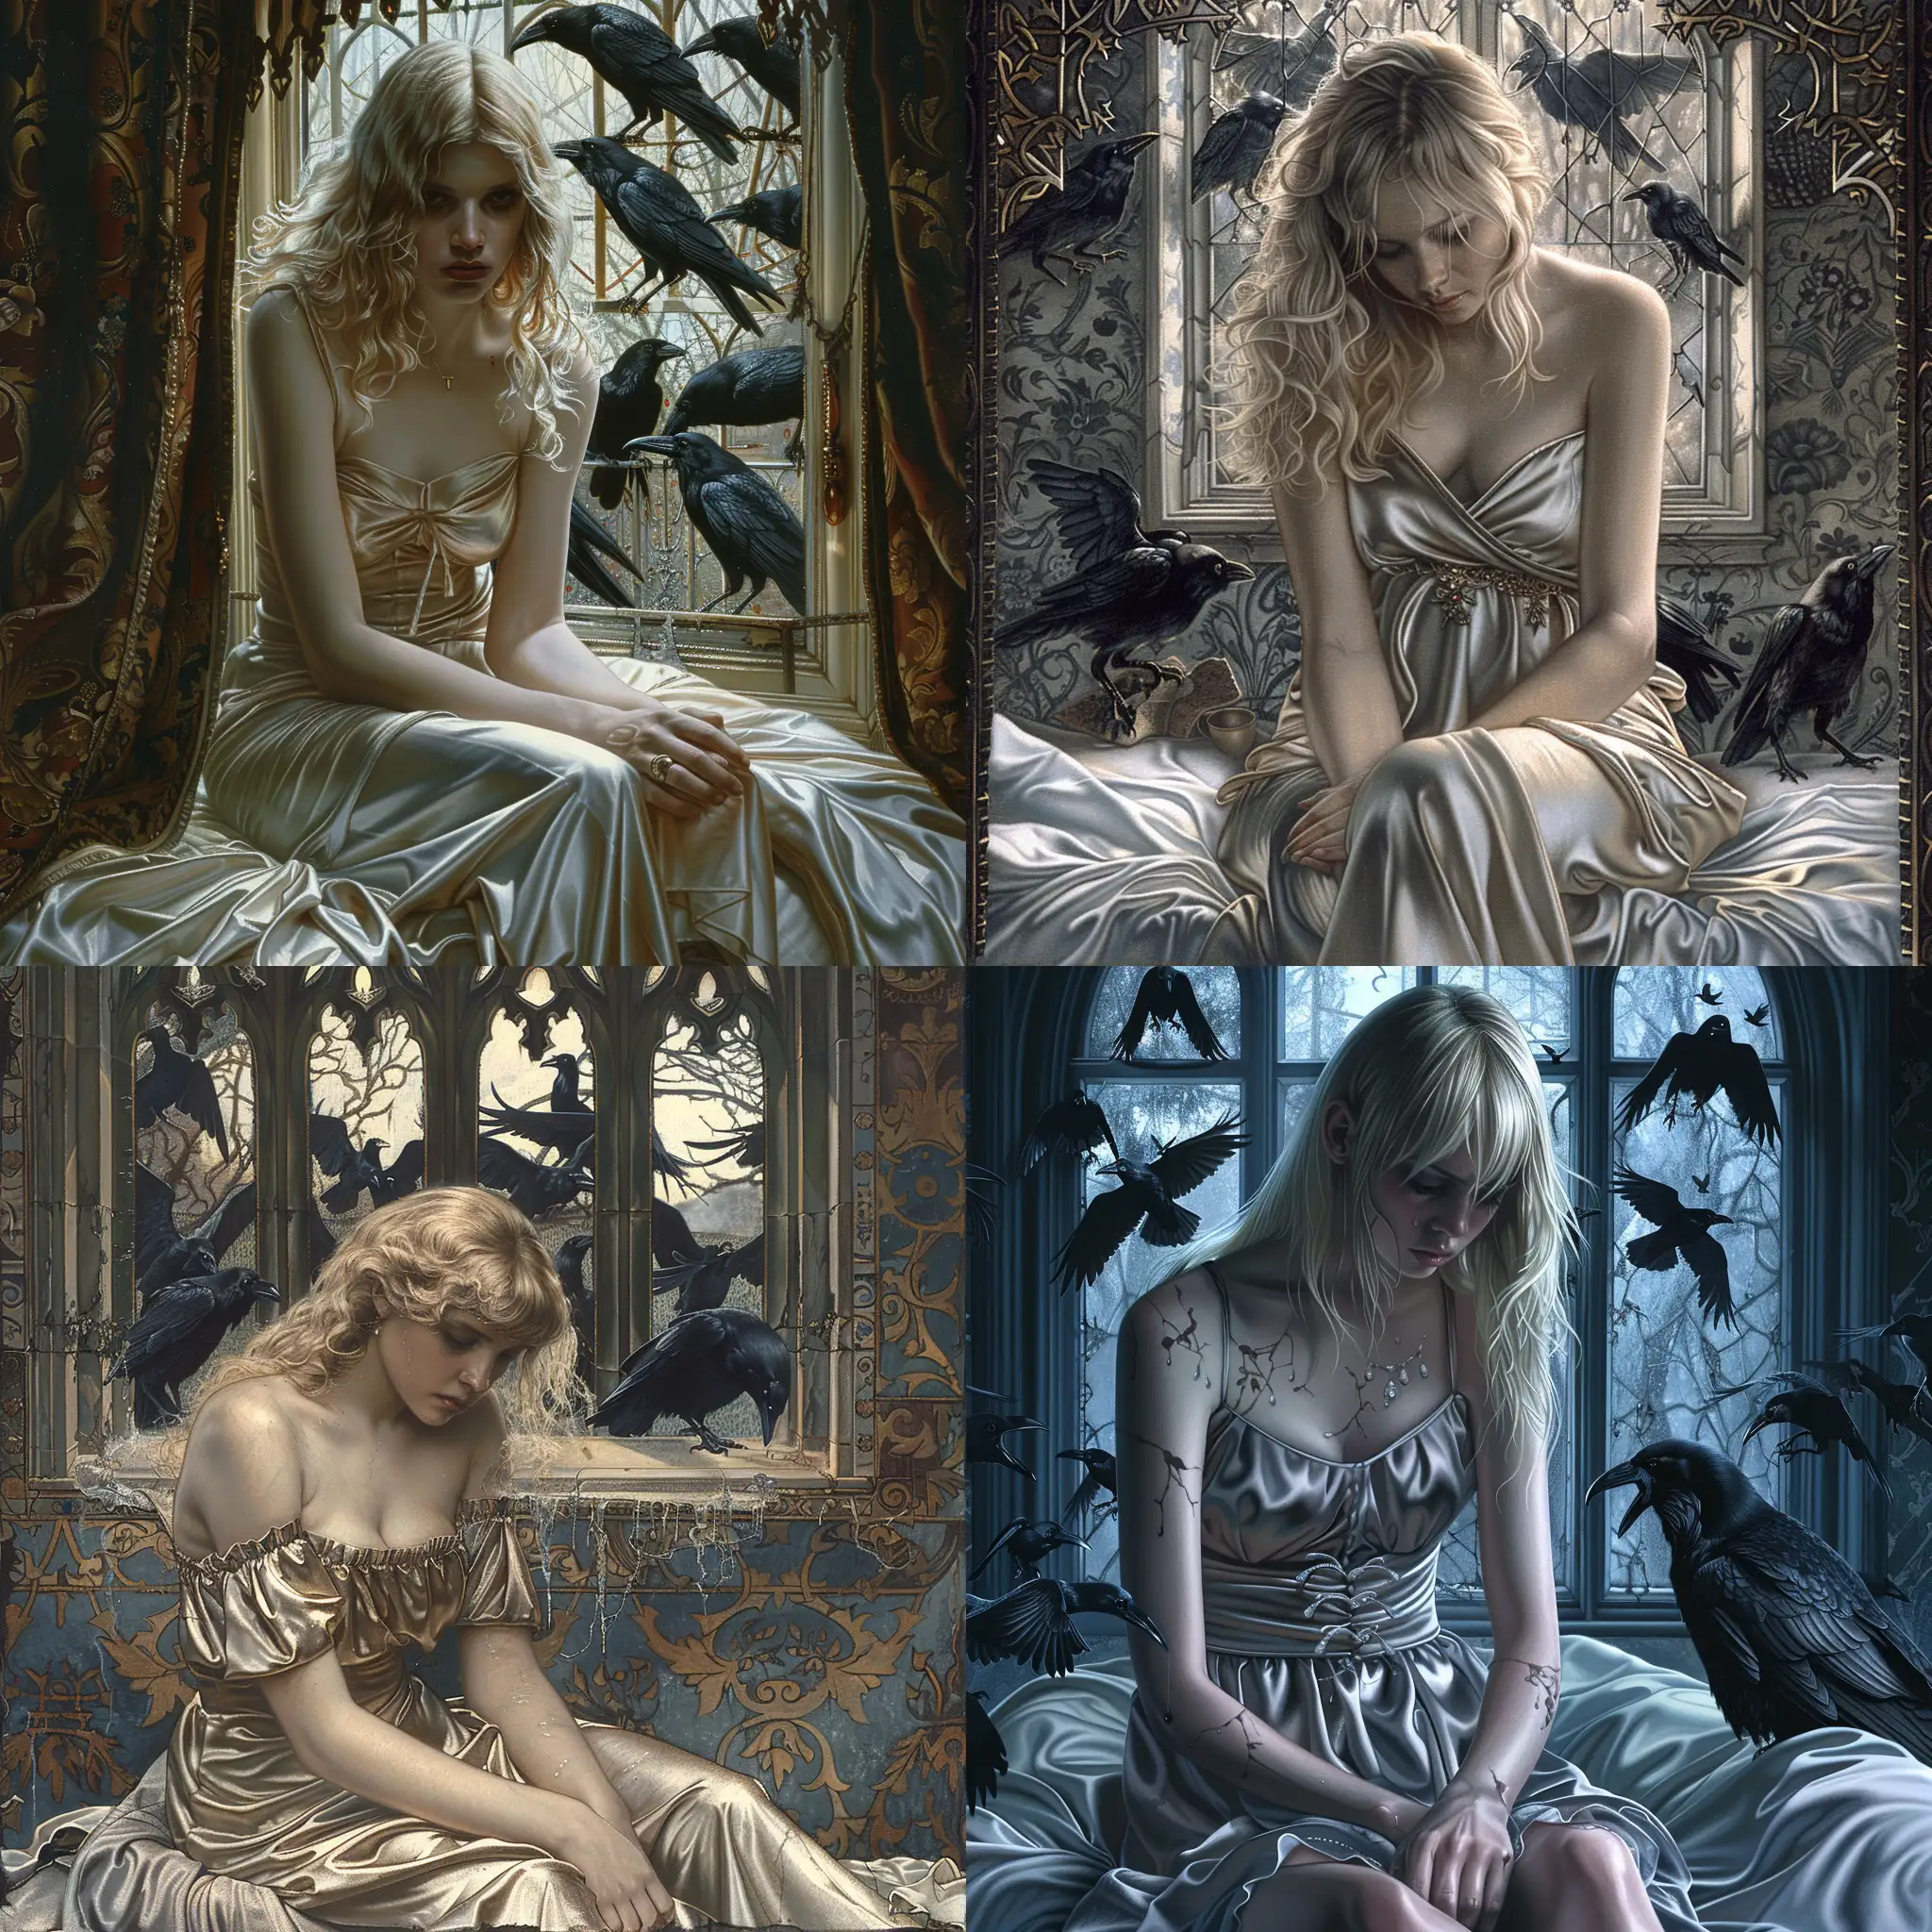 Surreal-Gothic-Portrait-Enigmatic-Blonde-Woman-in-Satin-Nightdress-with-Menacing-Ravens-Outside